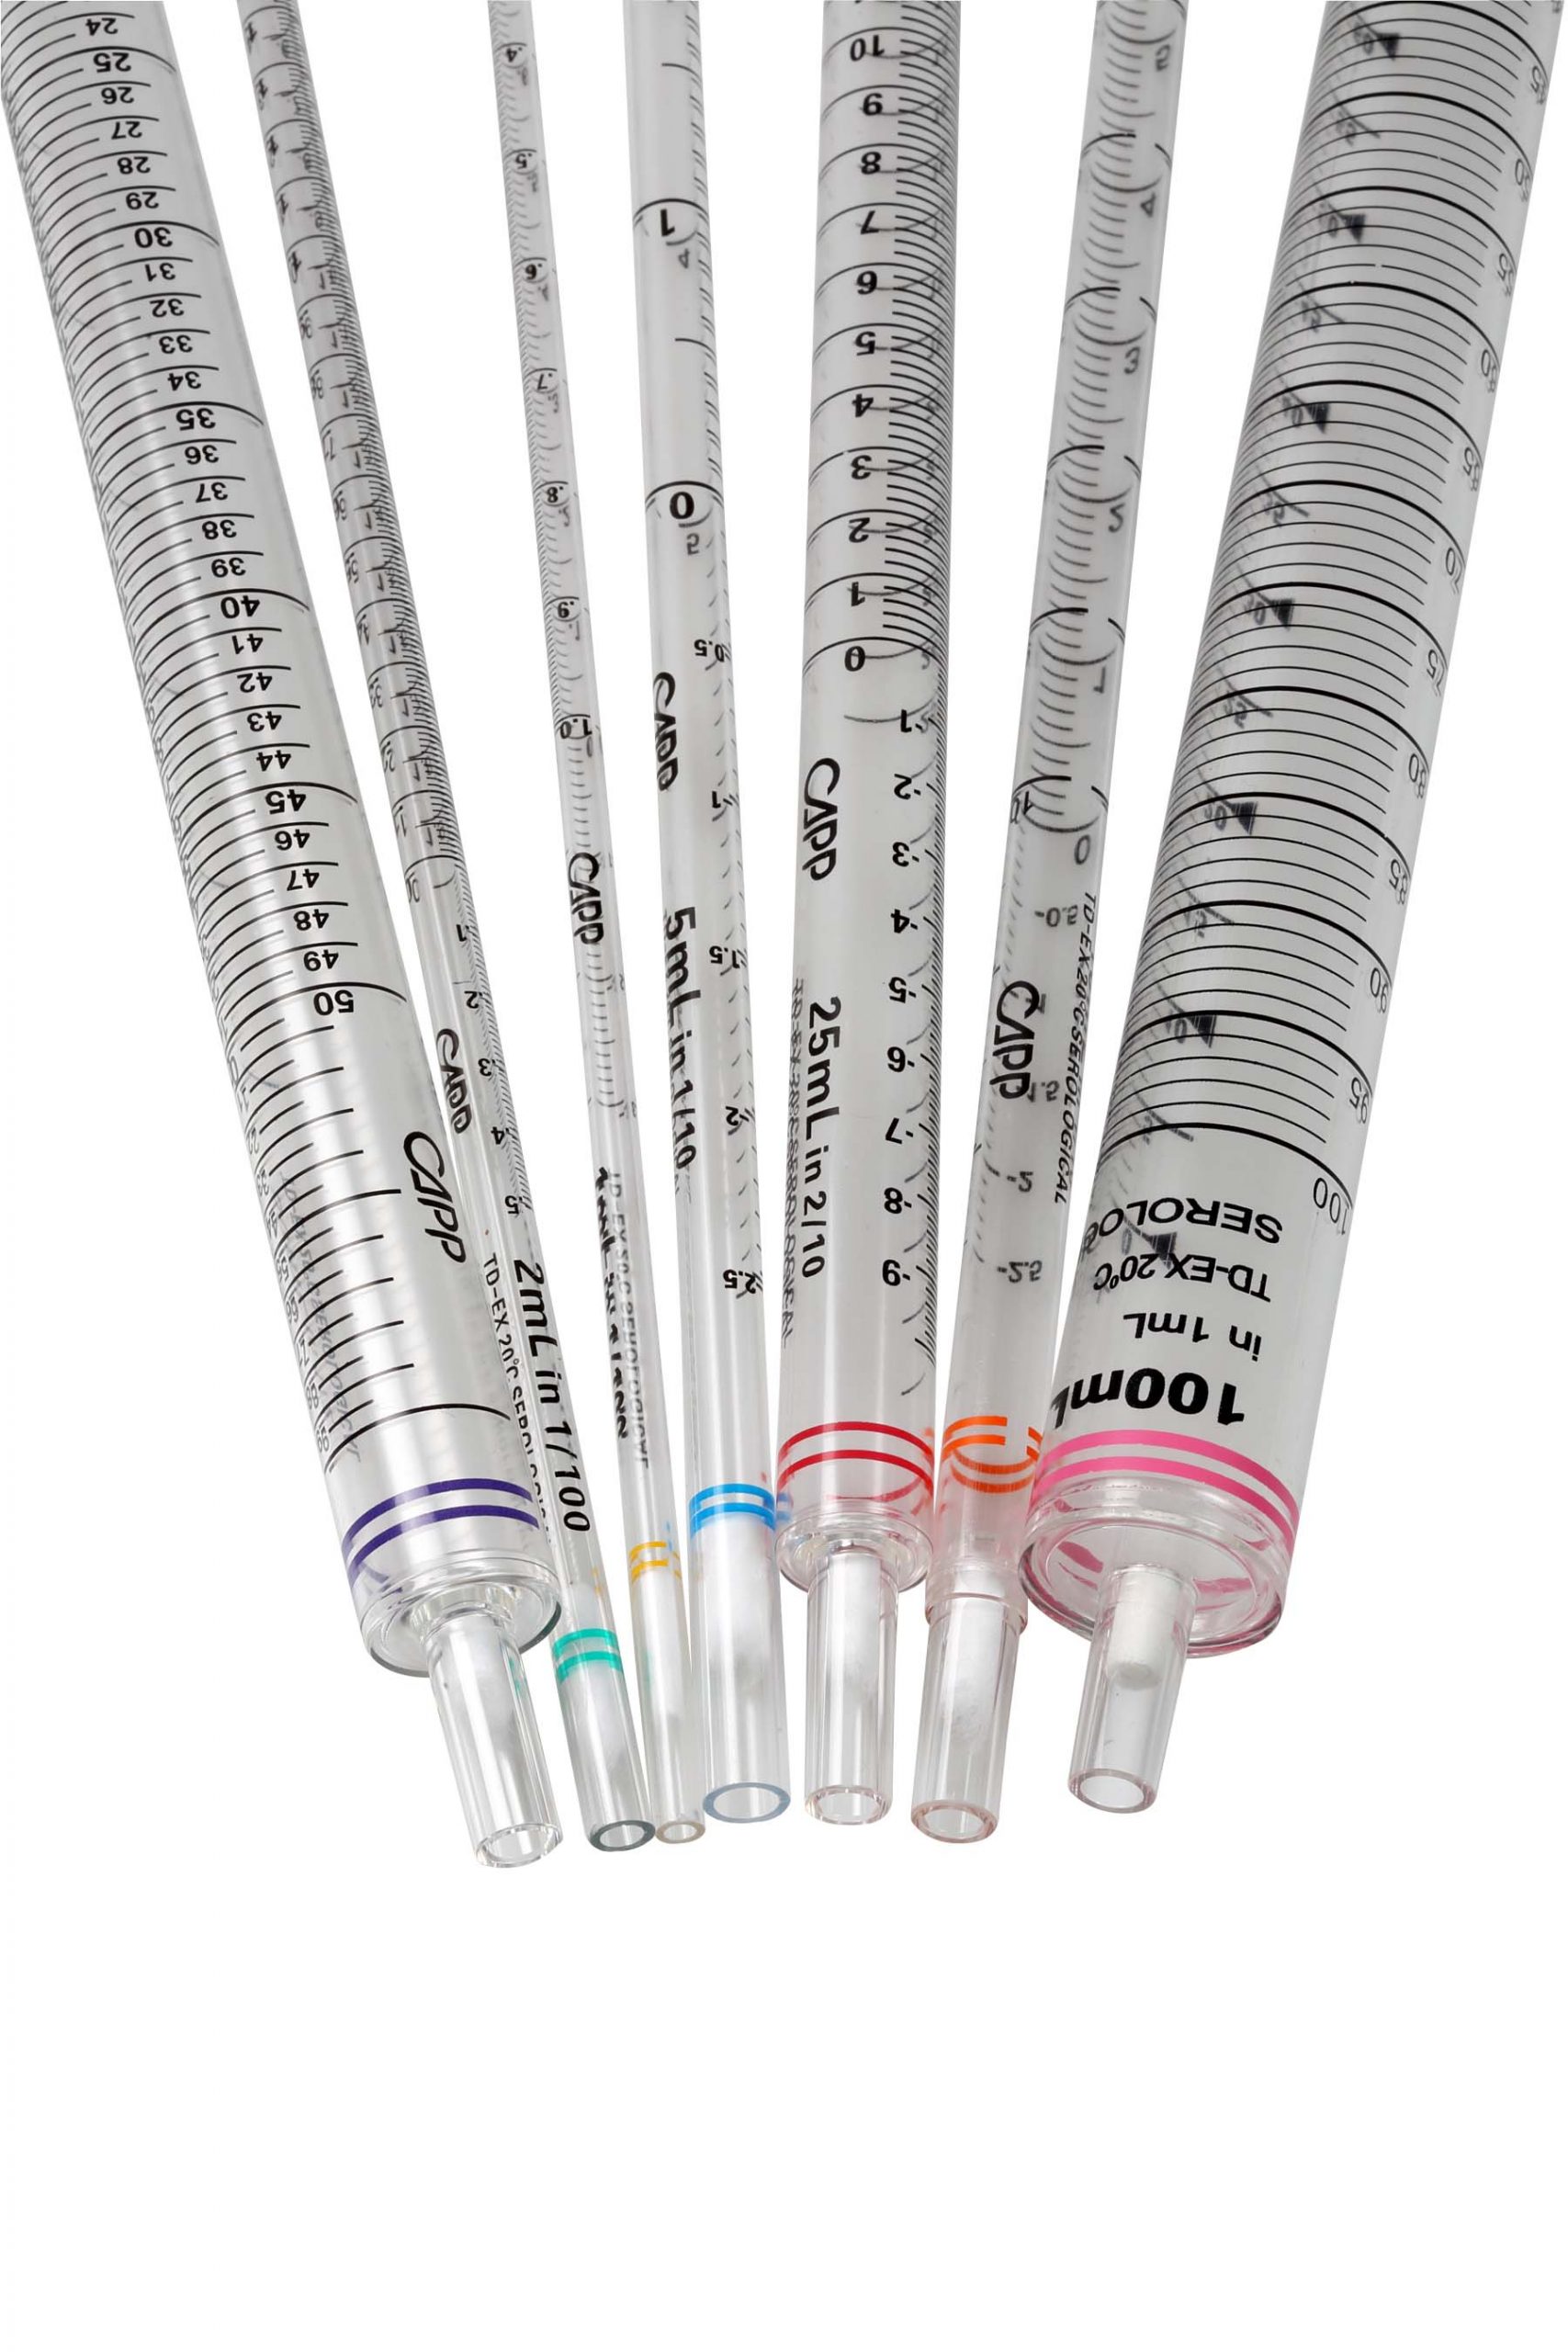 serological pipettes from Capp at labConsulting in Vienna